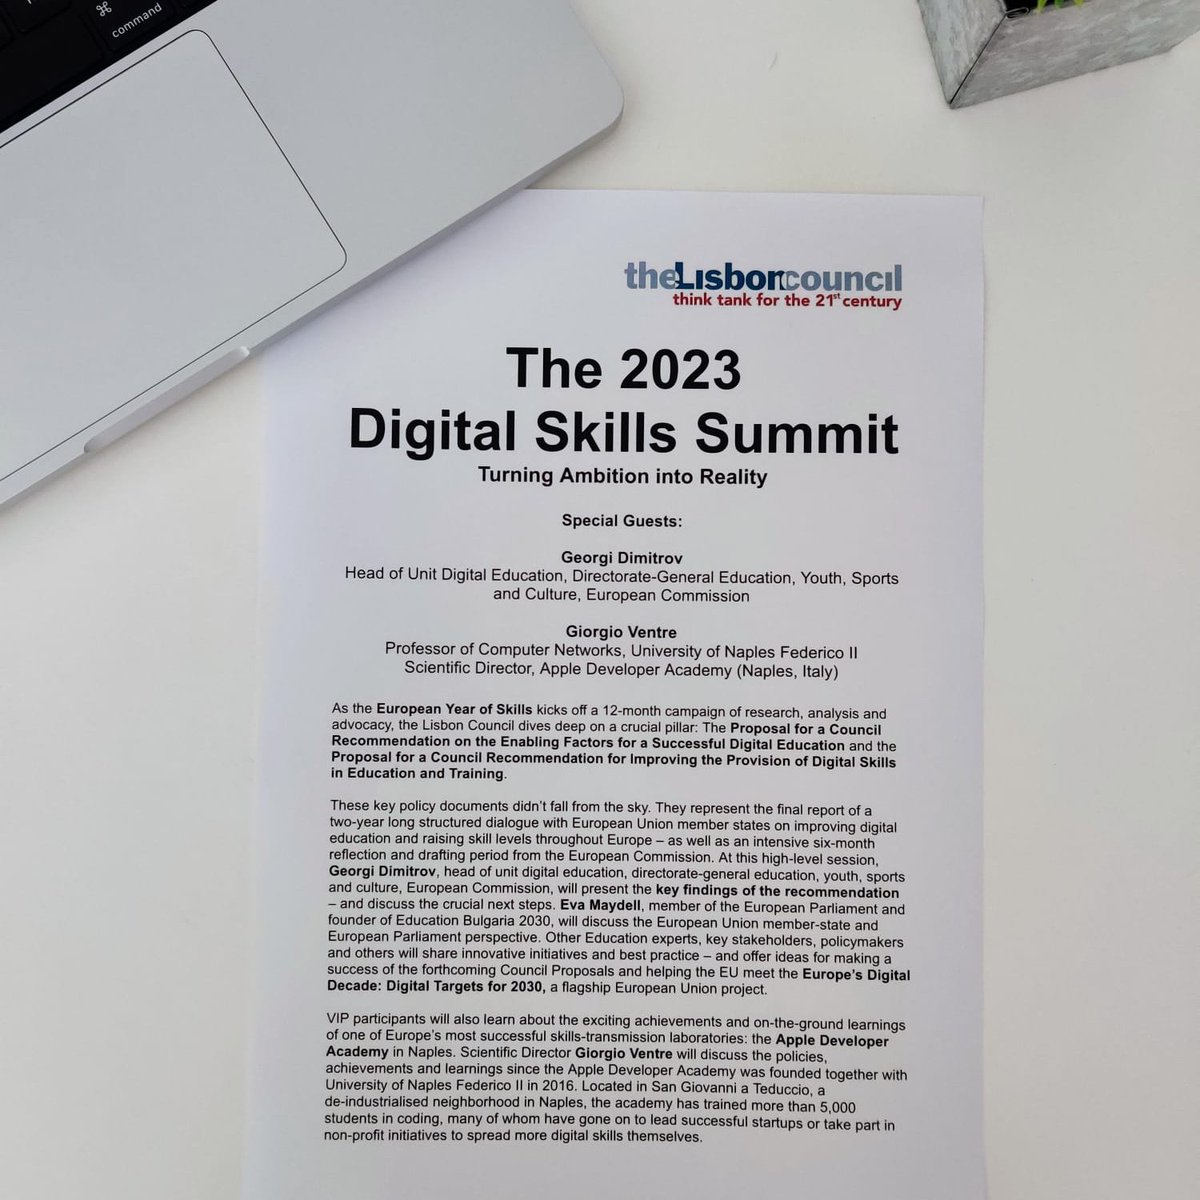 Starting now: Digital #Skills Summit at the #lisboncouncil with @G_P_Dimitrov, @EU_Commission, MEP @evamaydell, @Europarl_EN, and Prof. Giorgio Ventre, @Apple Developer Academy! 💡How do we make the #EuropeanYearofSkills a turning point for Europe? #digitalskills